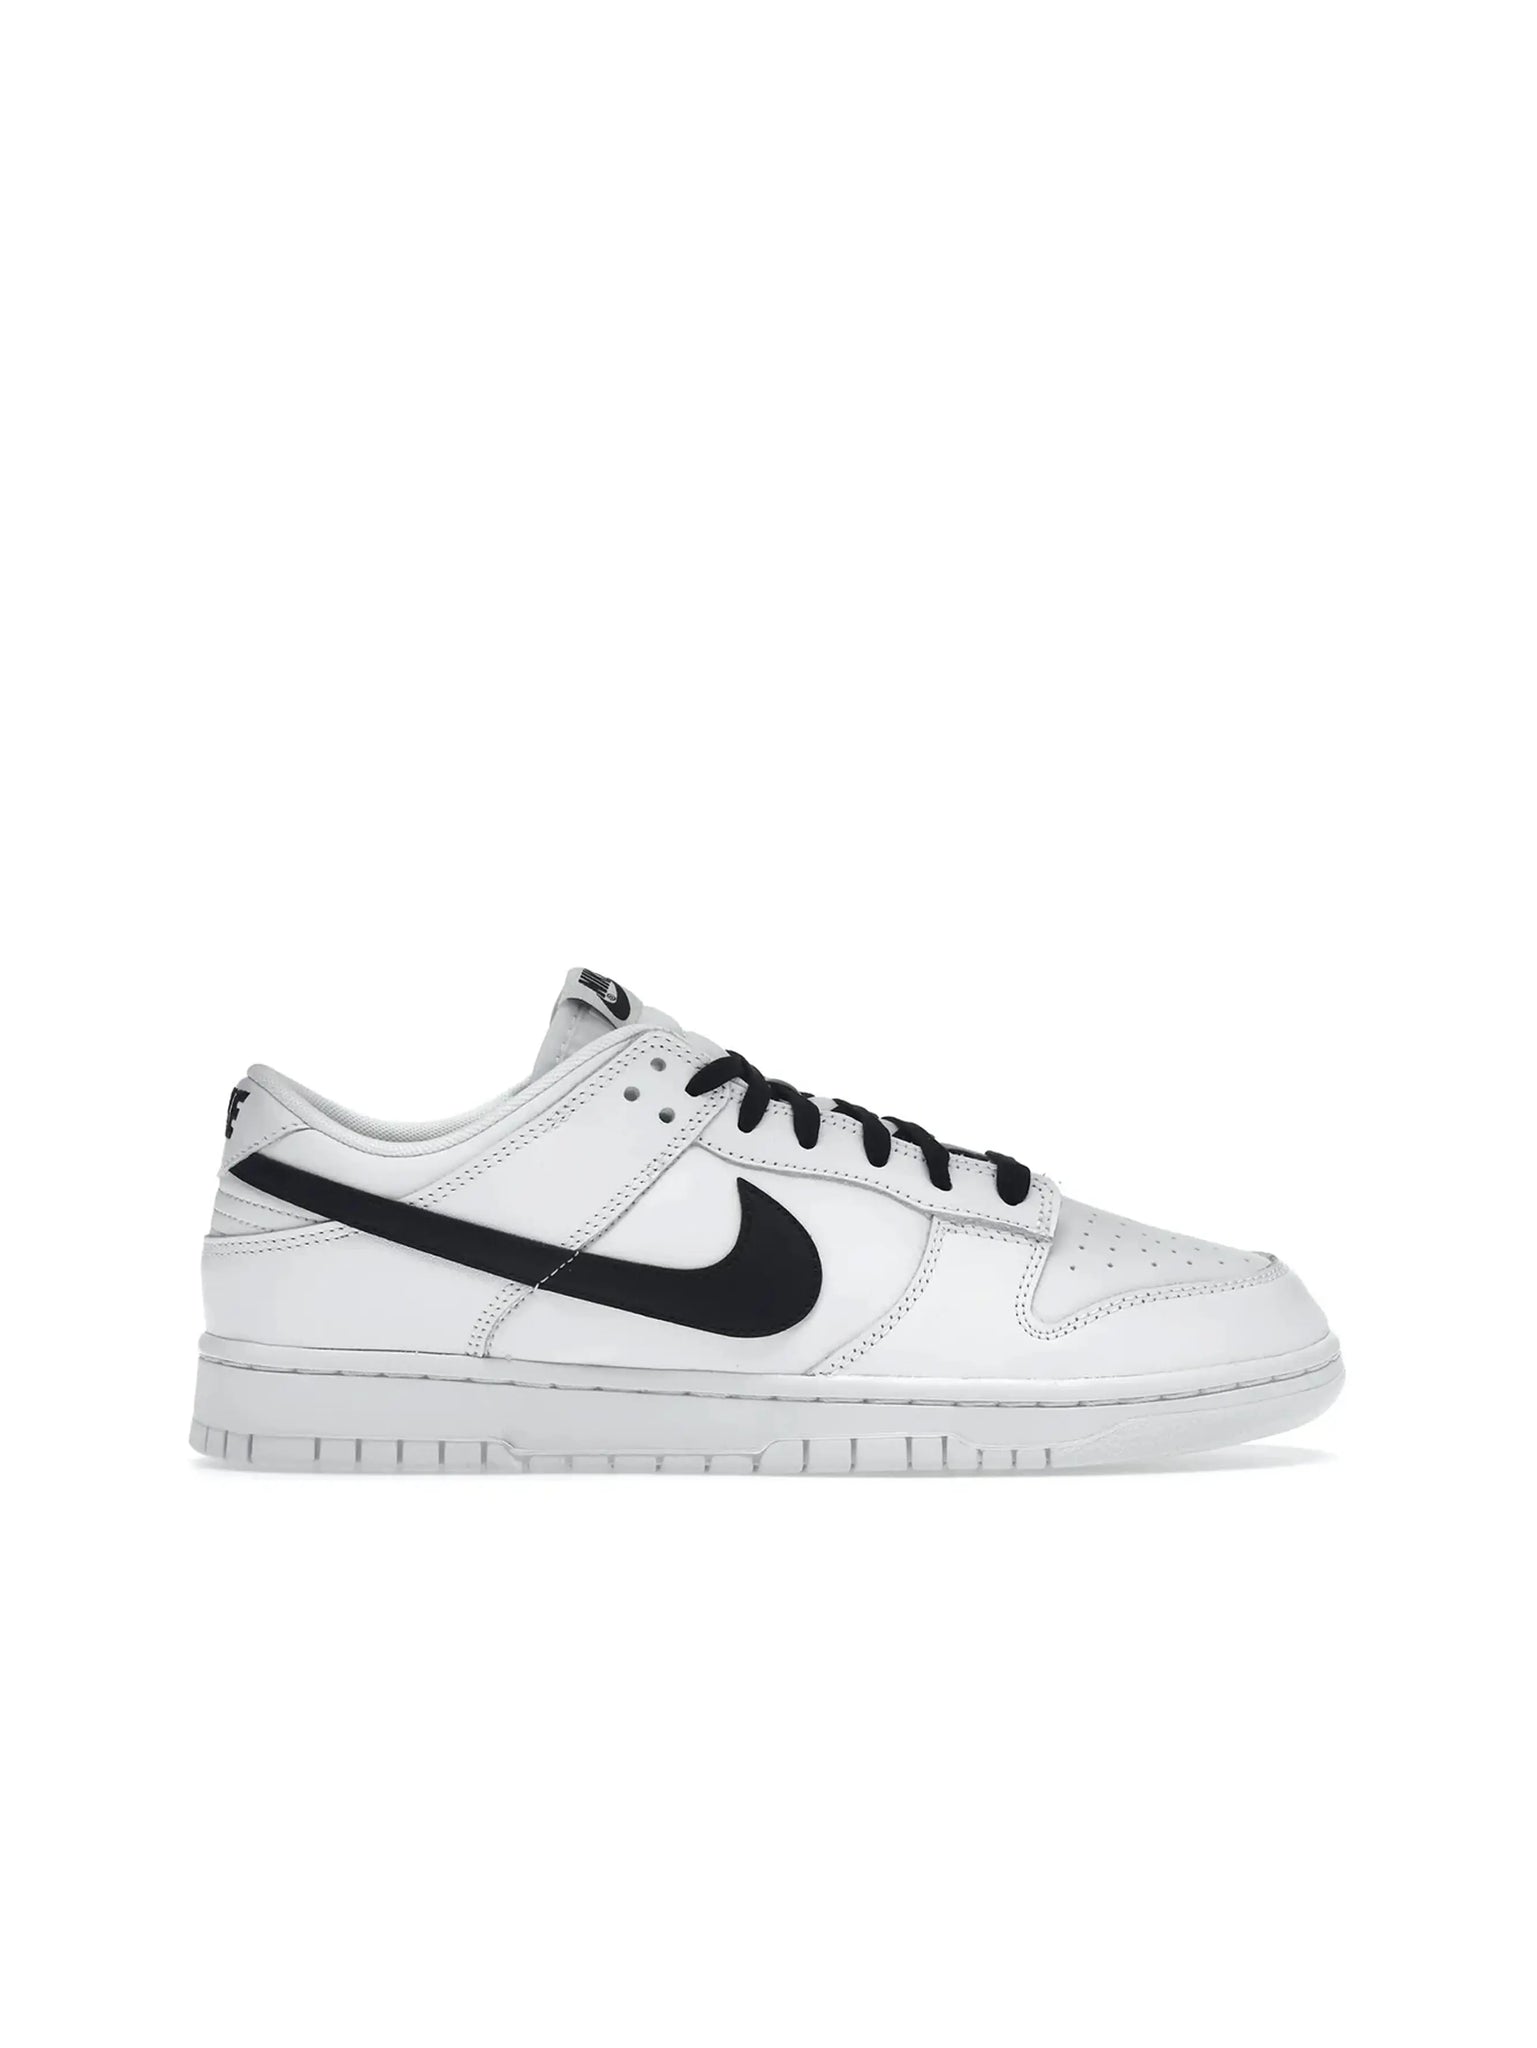 Nike Dunk Low Reverse Panda in Auckland, New Zealand - Shop name